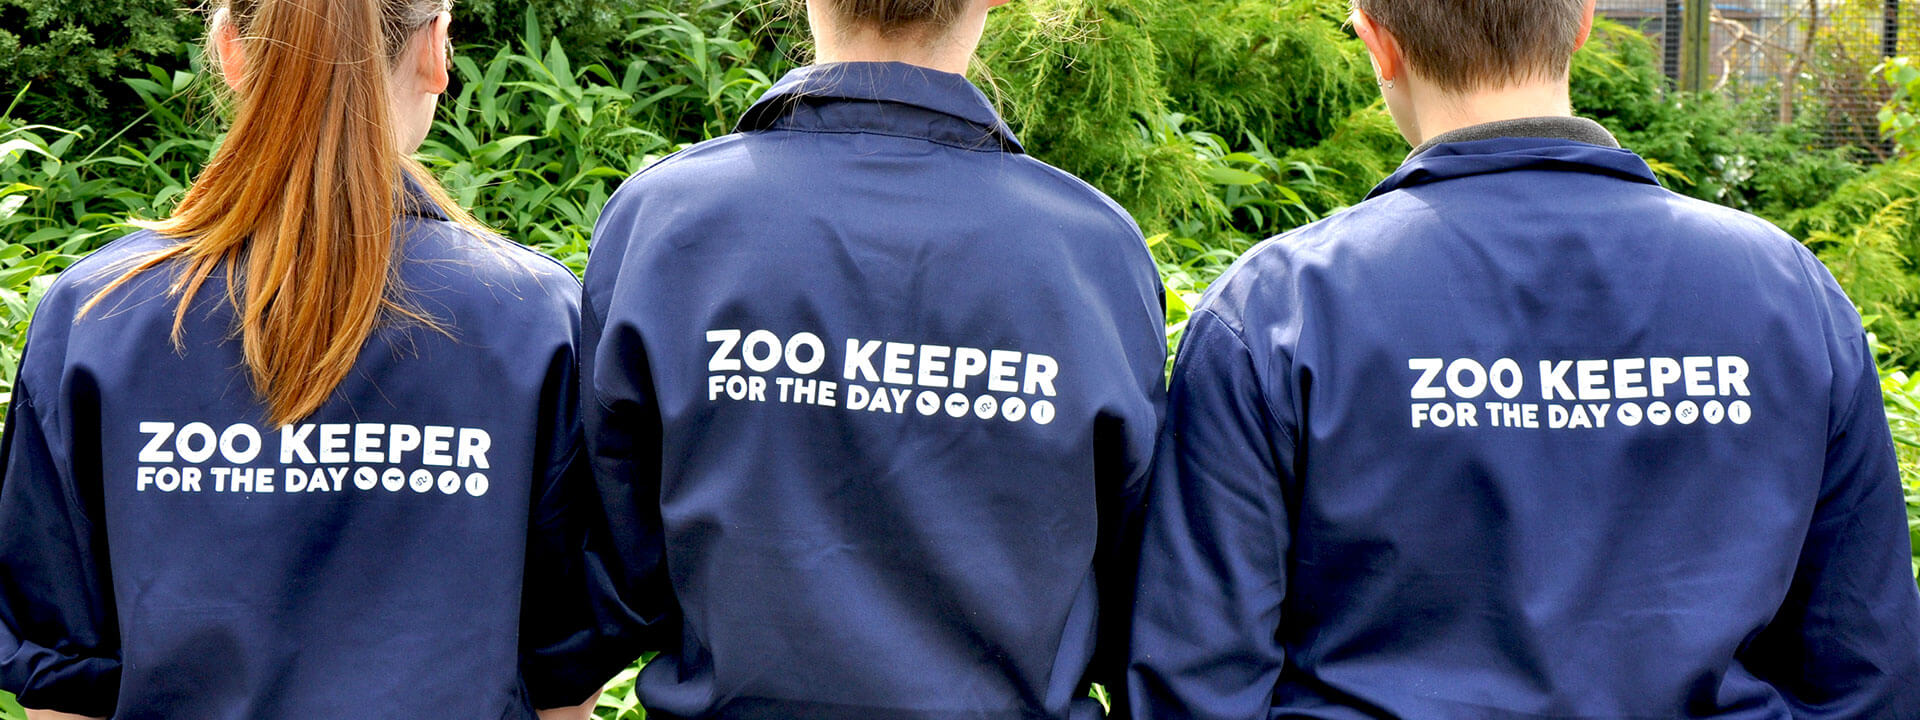 Zookeeper for the Day